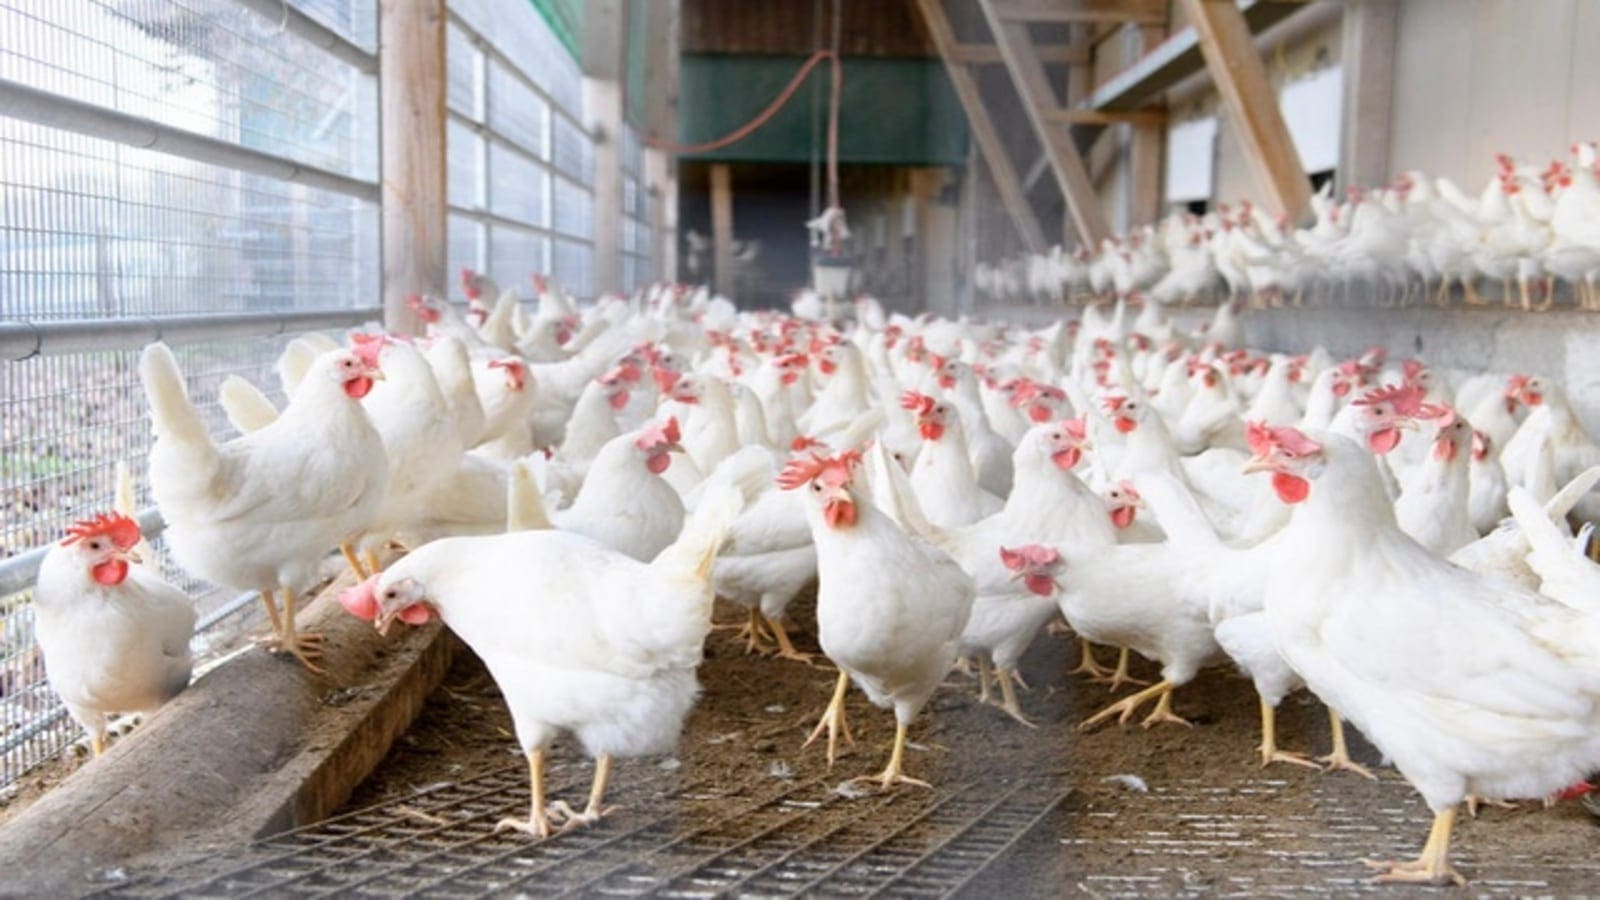 DSM-Novozymes Alliance launches its second-generation protease to improve poultry growth performance